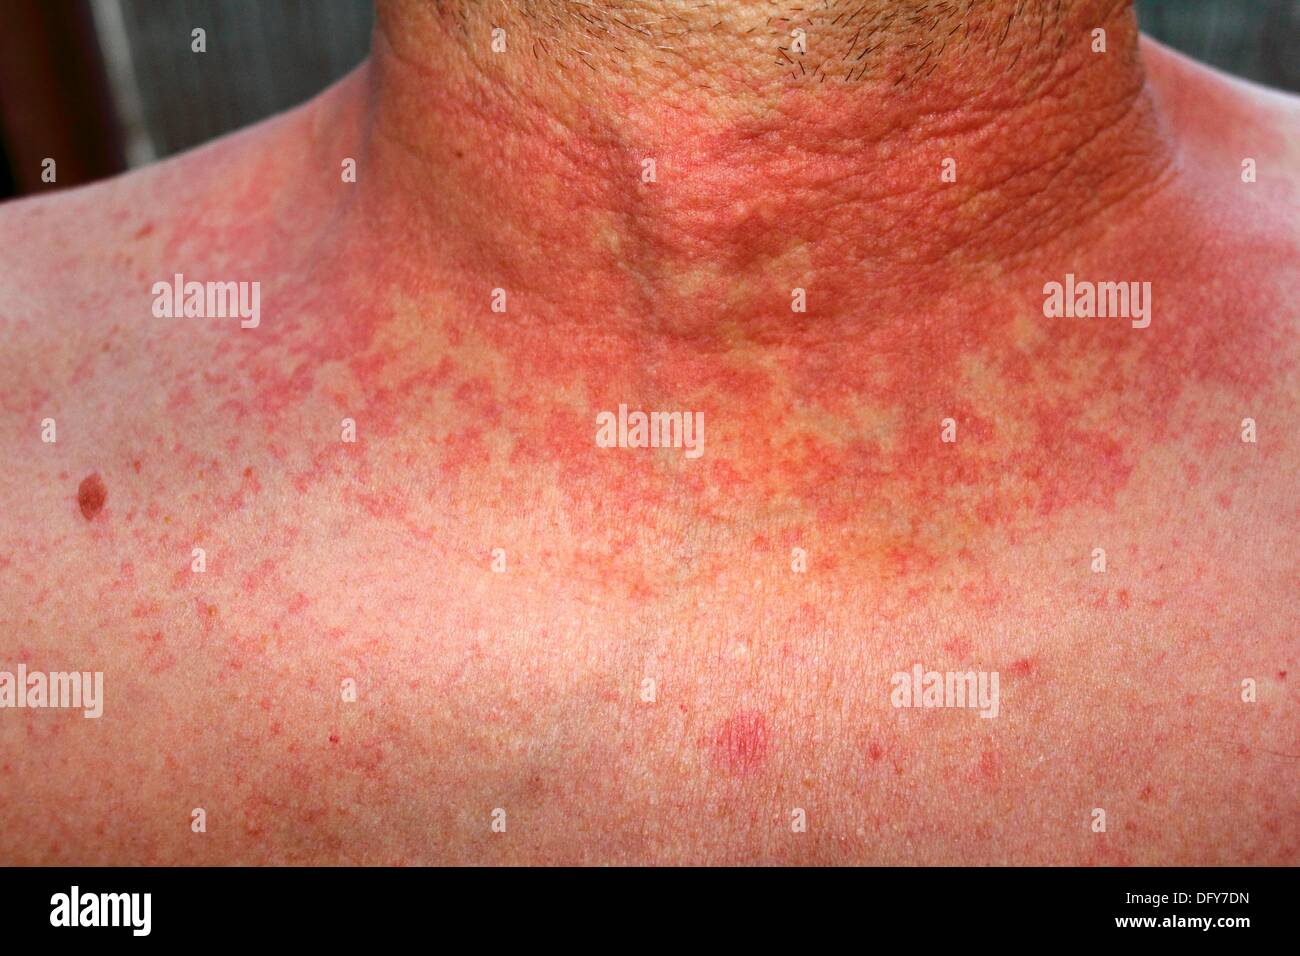 Scarlet fever mouth with symptoms of scarlatina Vector Image